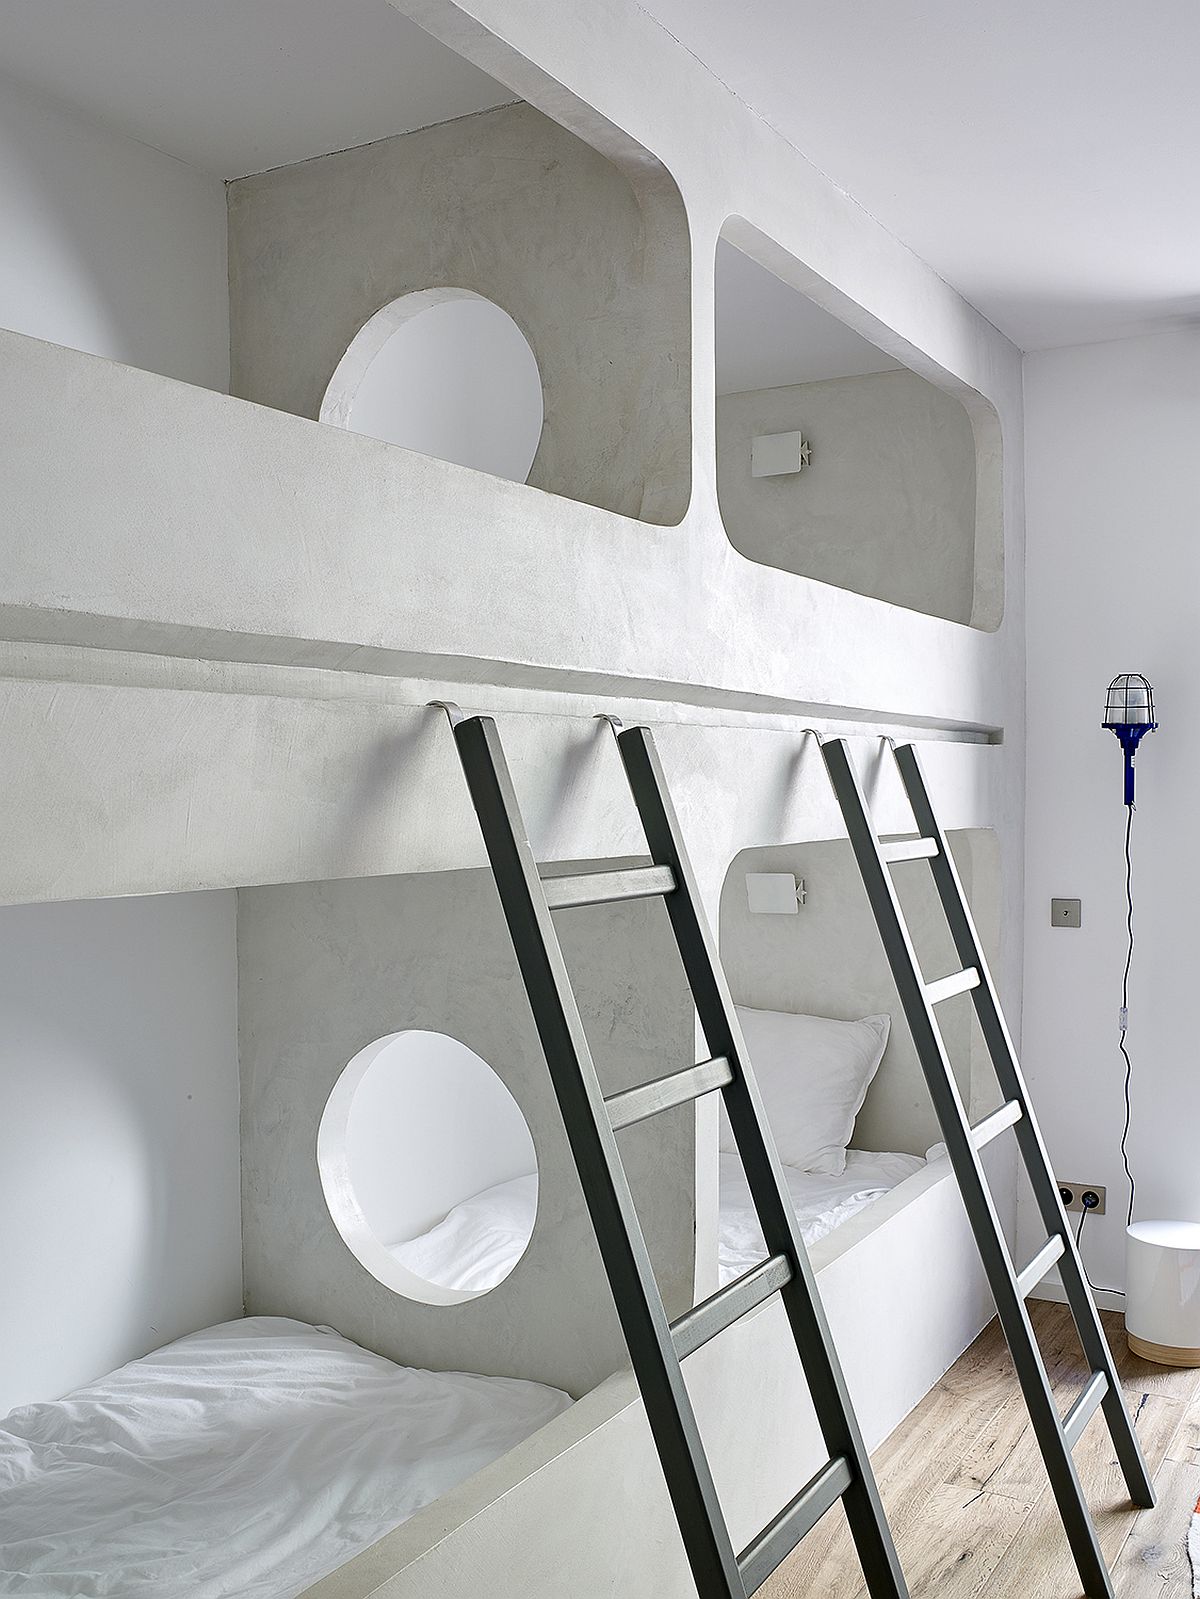 Bunk beds in the kids' room with ladder that feels both stylish and space-savvy